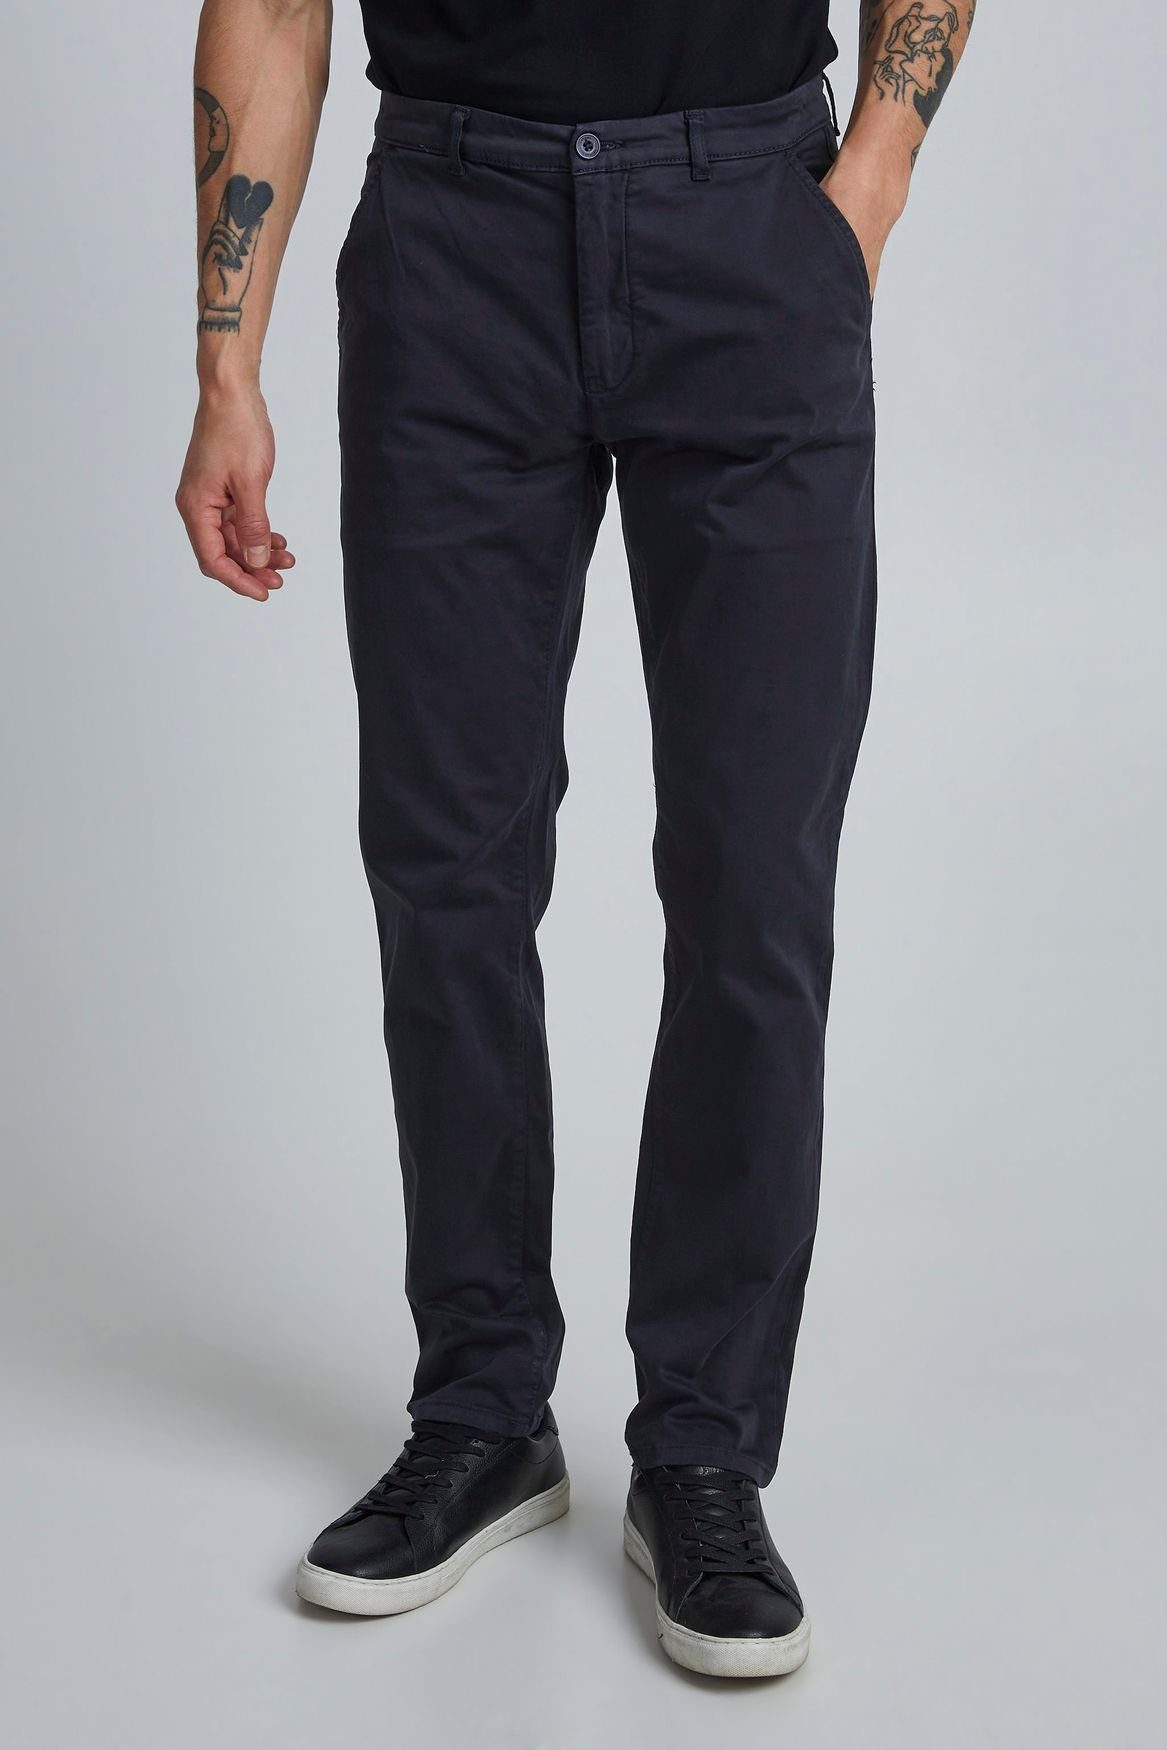 Casual Friday Chinohose Business Casual Chino Stoff Hose Slim Fit VIGGO 4239 in Navy | 